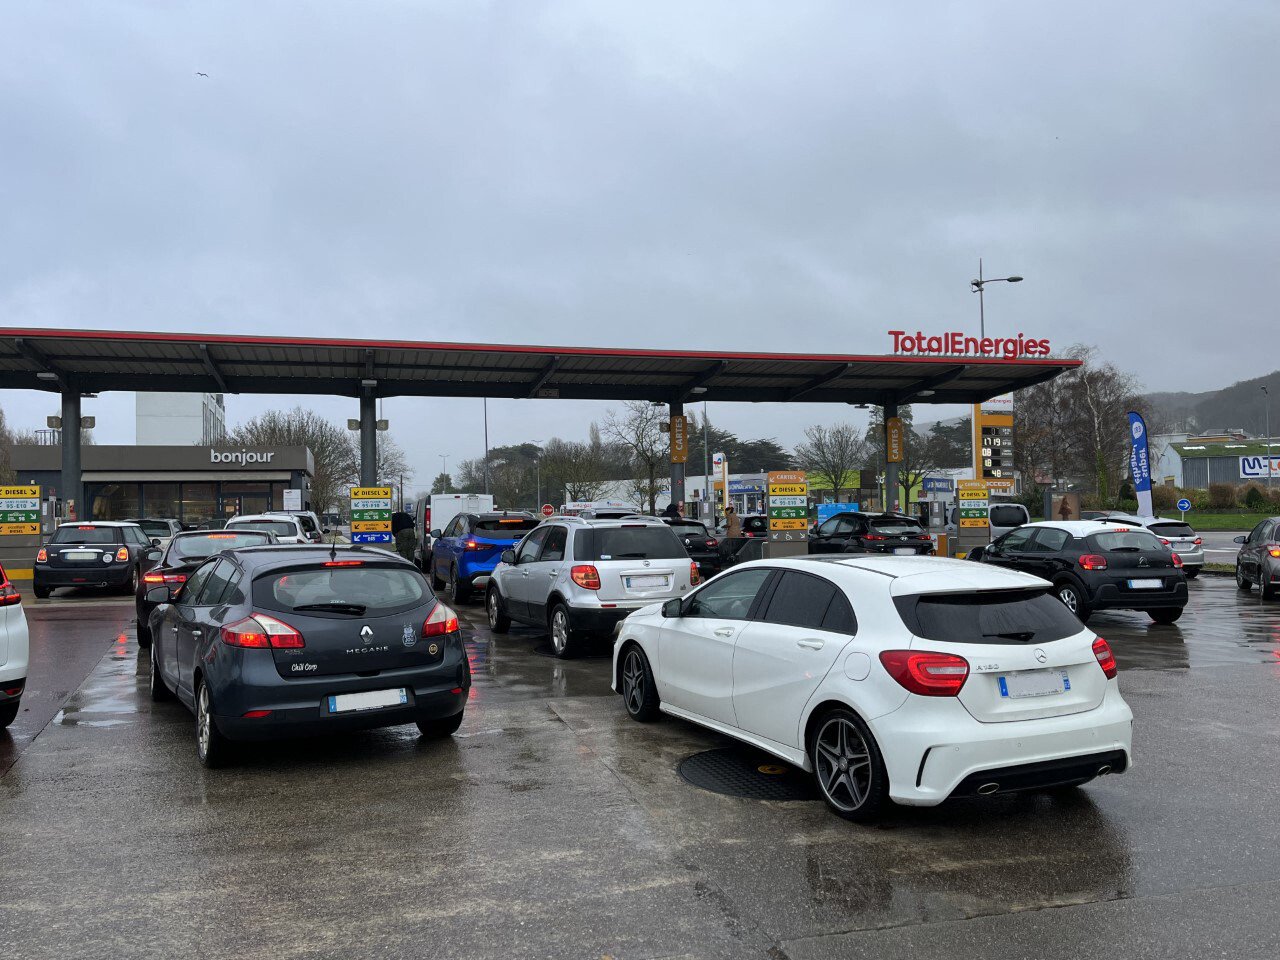 During the afternoon of this Friday, December 30, 2022, a queue formed at the Total Access service station in Tourlaville (Manche).